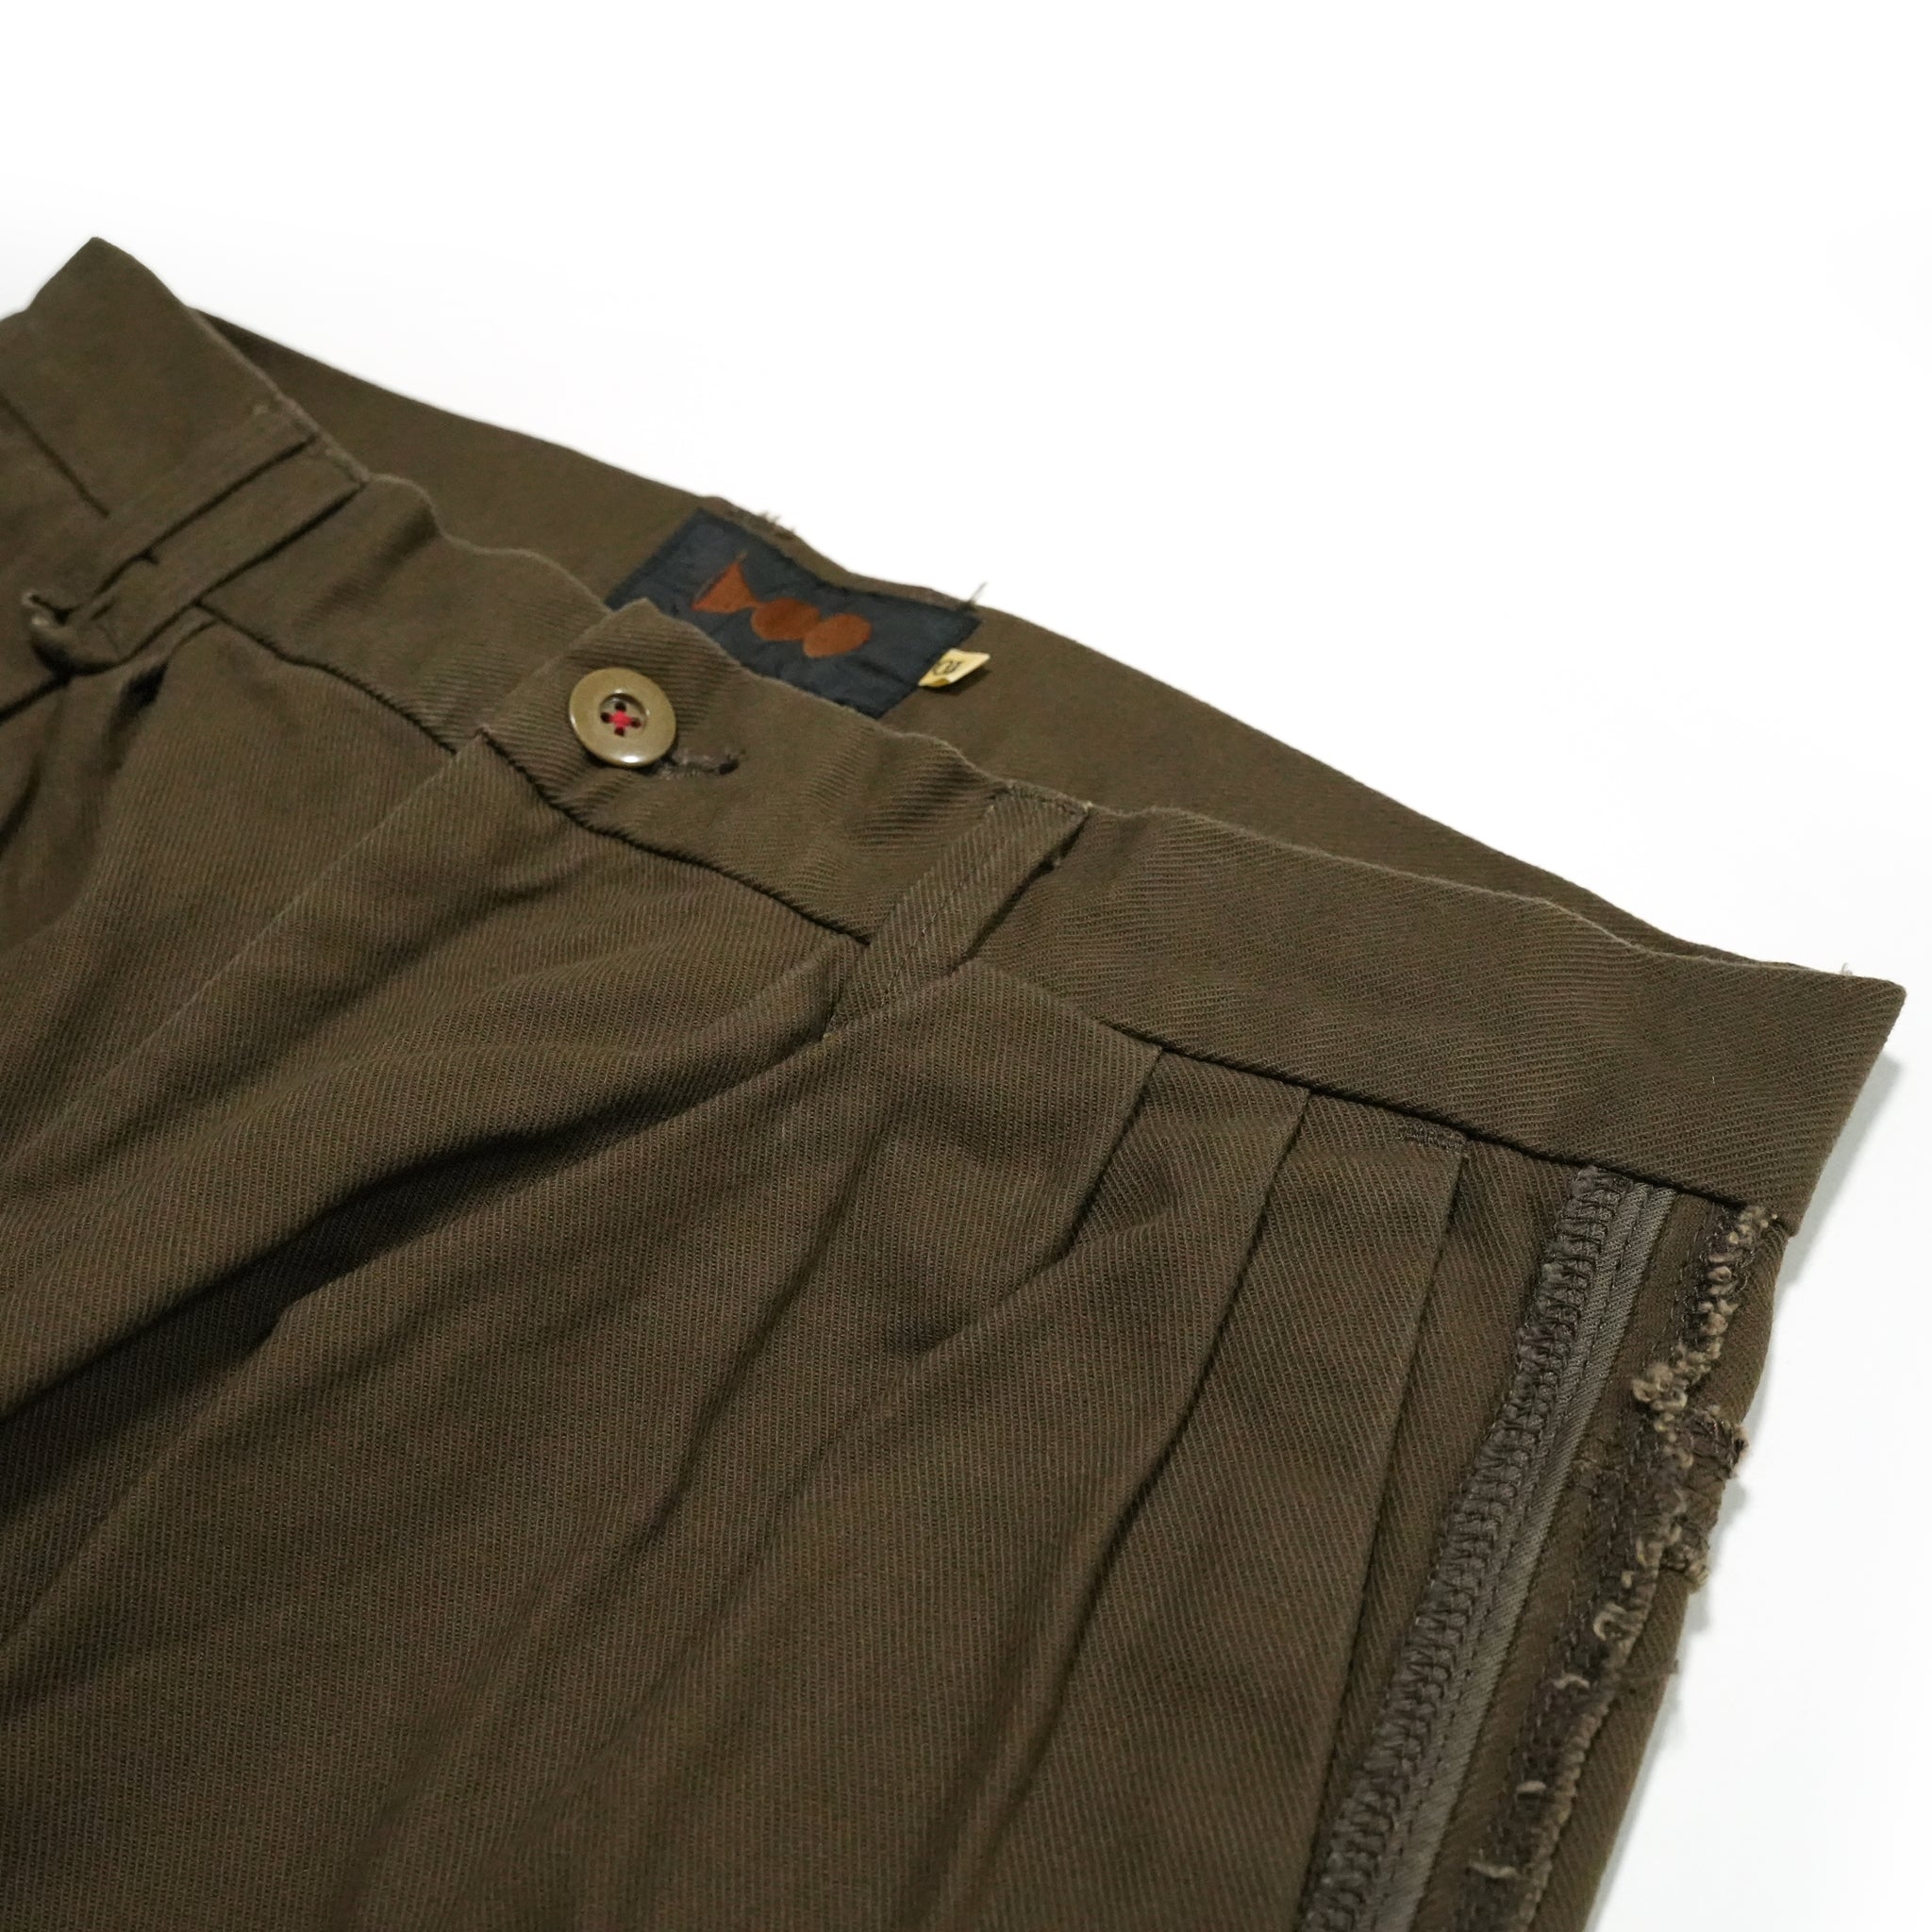 No:VOO-1153 | Name:TRICK TROUSER | Color:Coffee/Black【VOO_ヴォー】